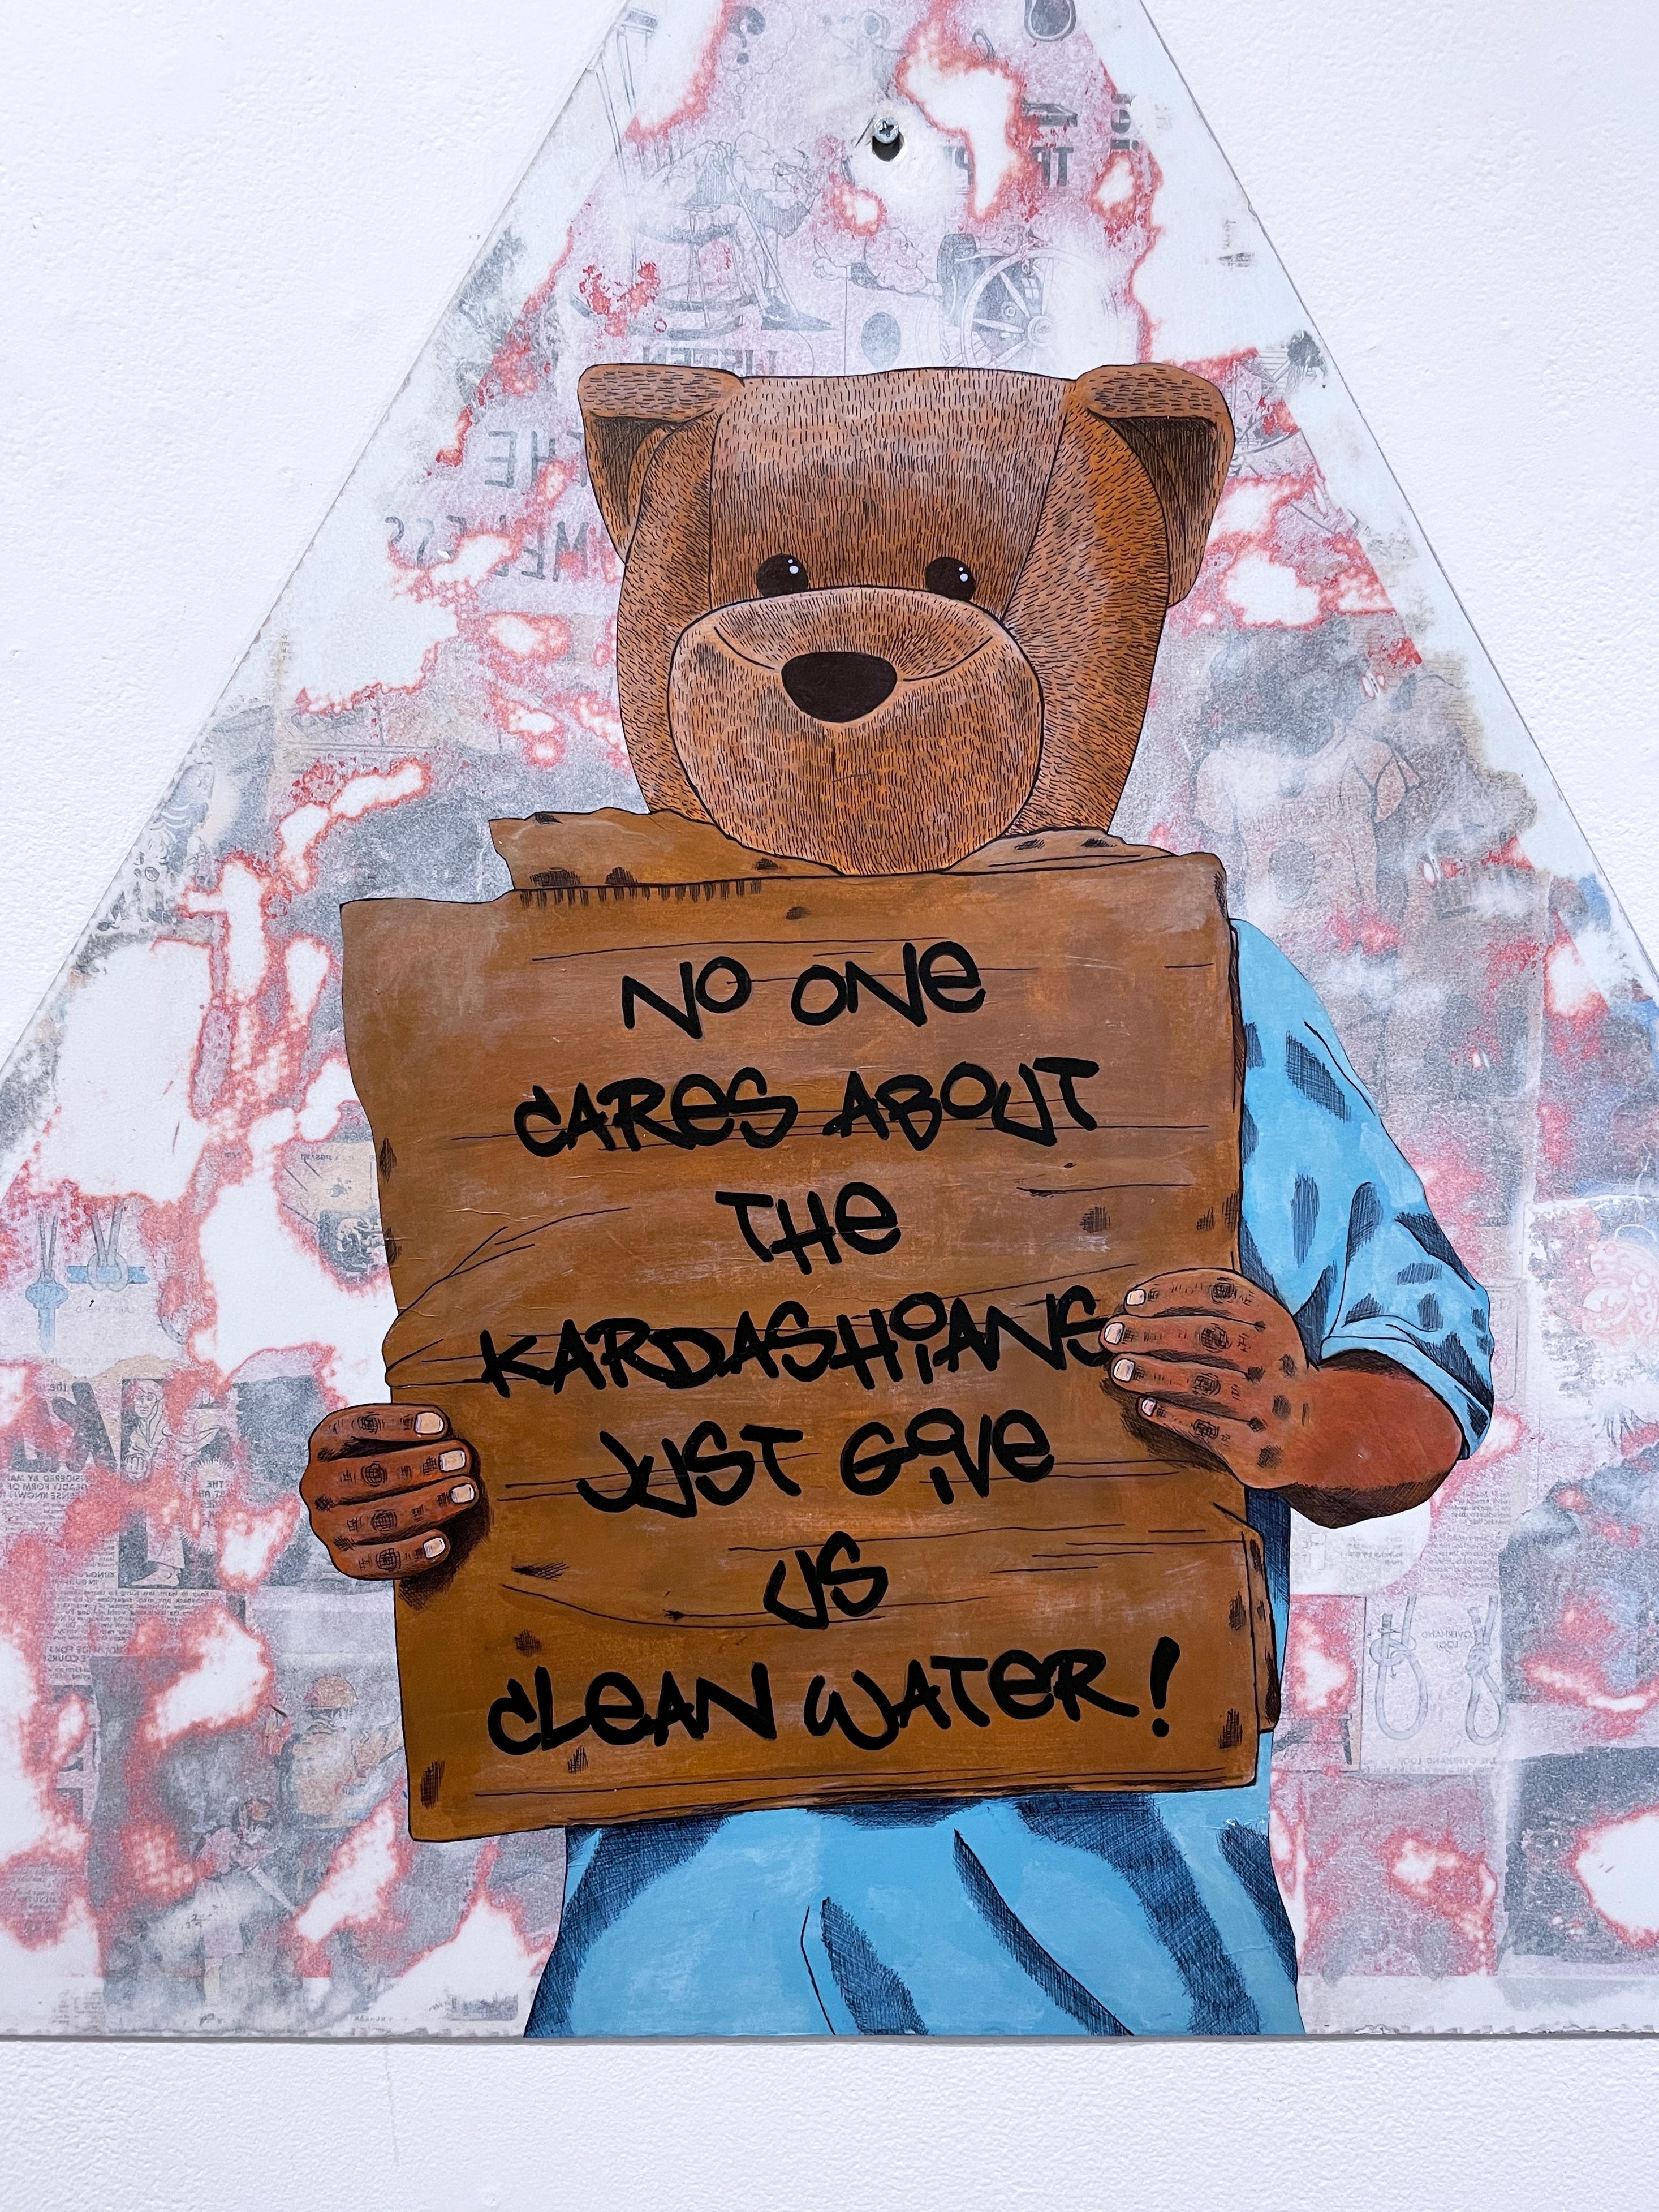 No One Cares (2022) by east coast wheatpaste and street artist Sean 9 Lugo

Ink, acrylic and marker on paper and mixed media on reclaimed metal triangle shaped street sign depicting portrait of a man holding a sign with Sean 9 Lugo's signature teddy